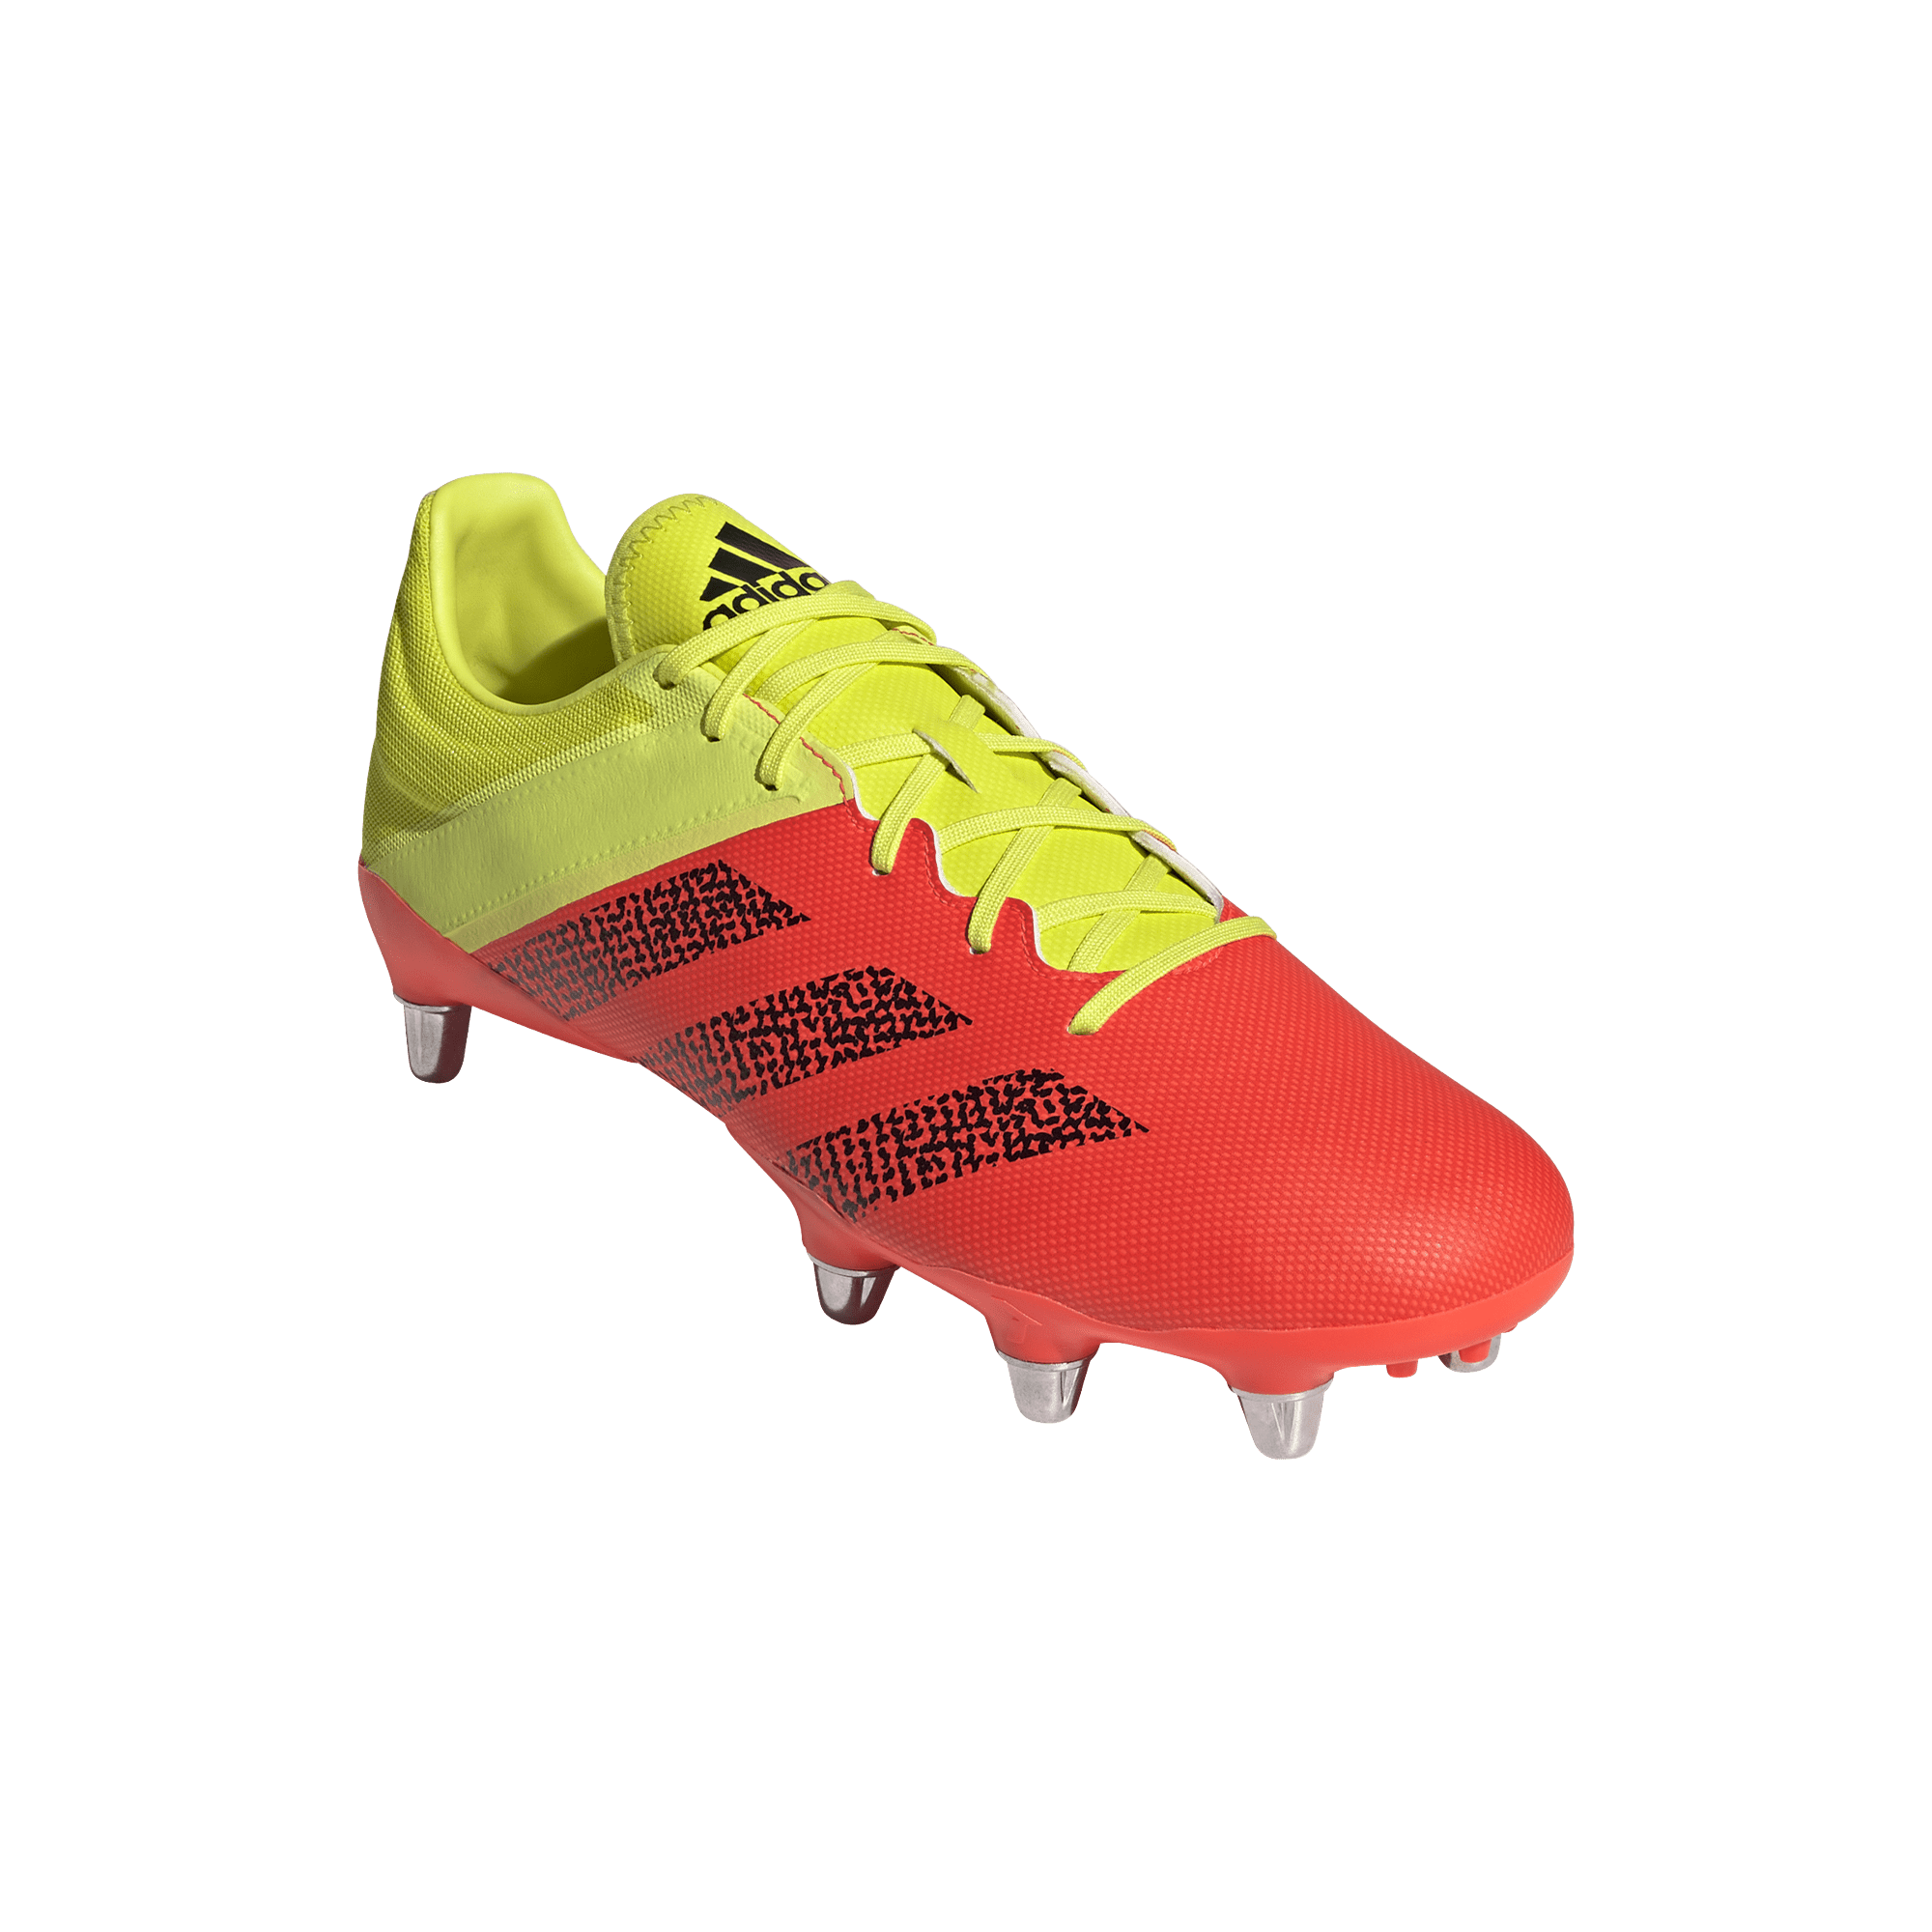 Adidas Kakari Rugby Cleat - Soft Boot - Solar Red - SKU FZ5362 - World Rugby Shop